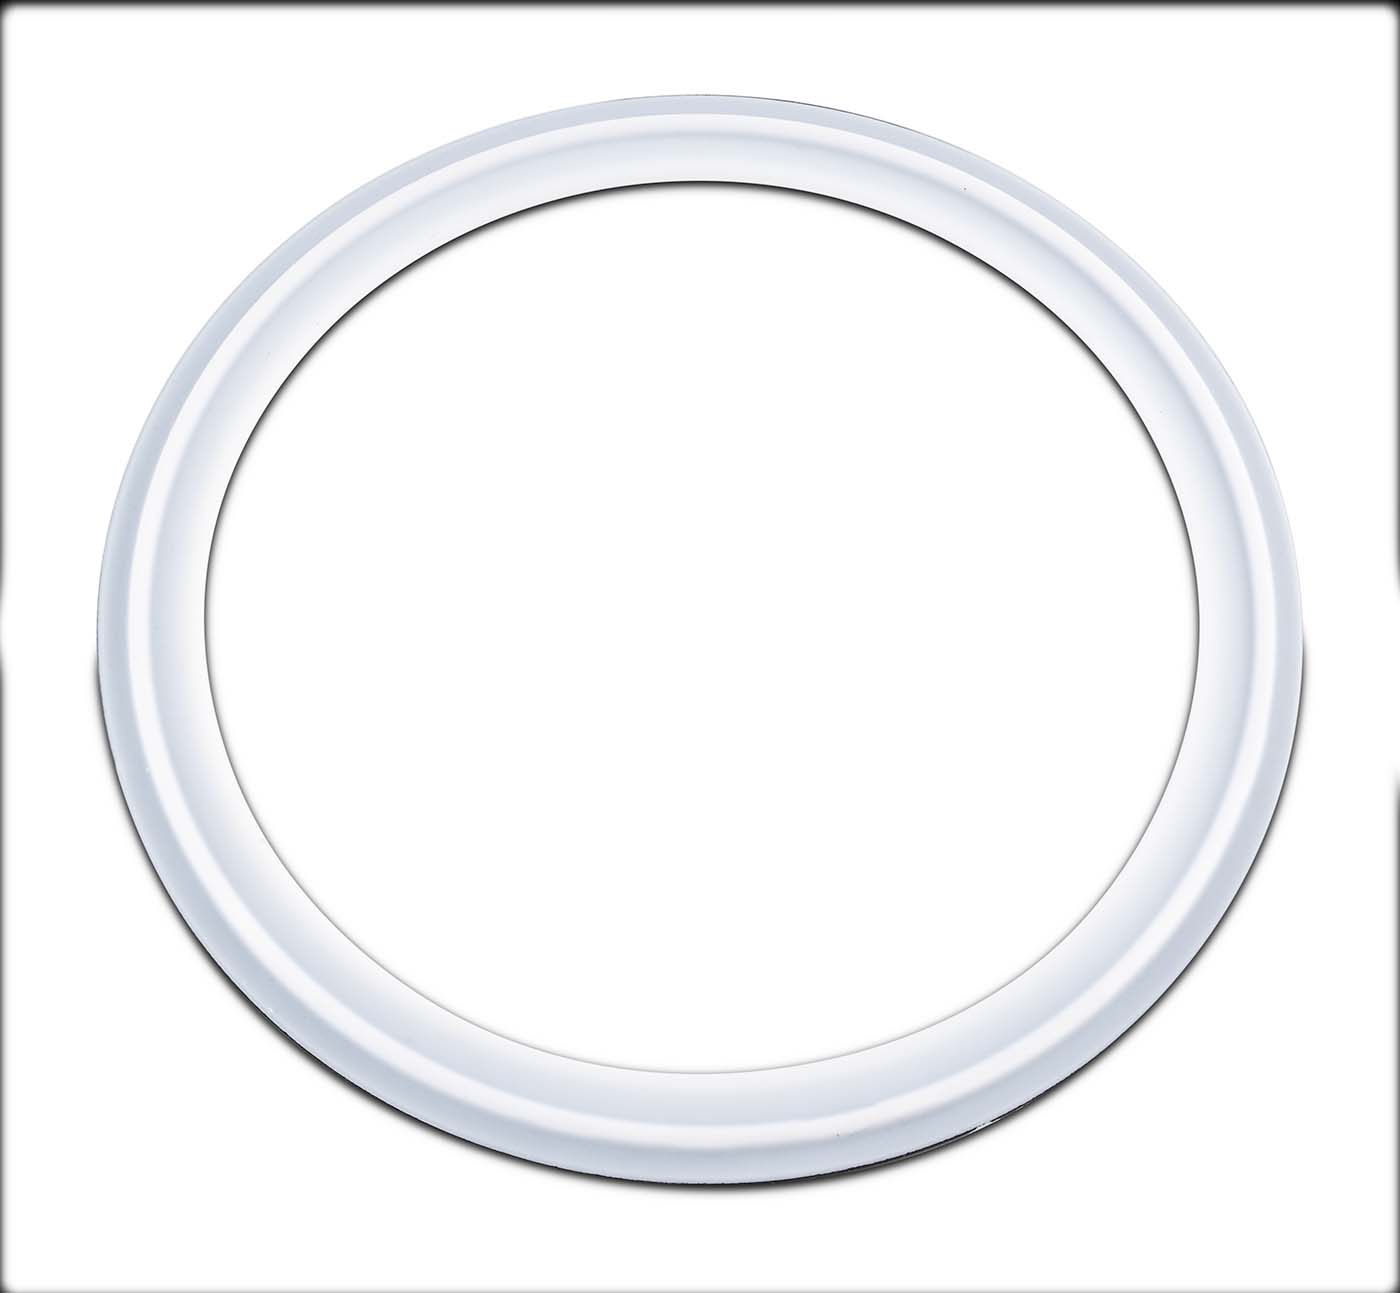 PTFE Envelope Tri-Clamp Gaskets with Viton Filler Shop All Categories BVV 4-inch